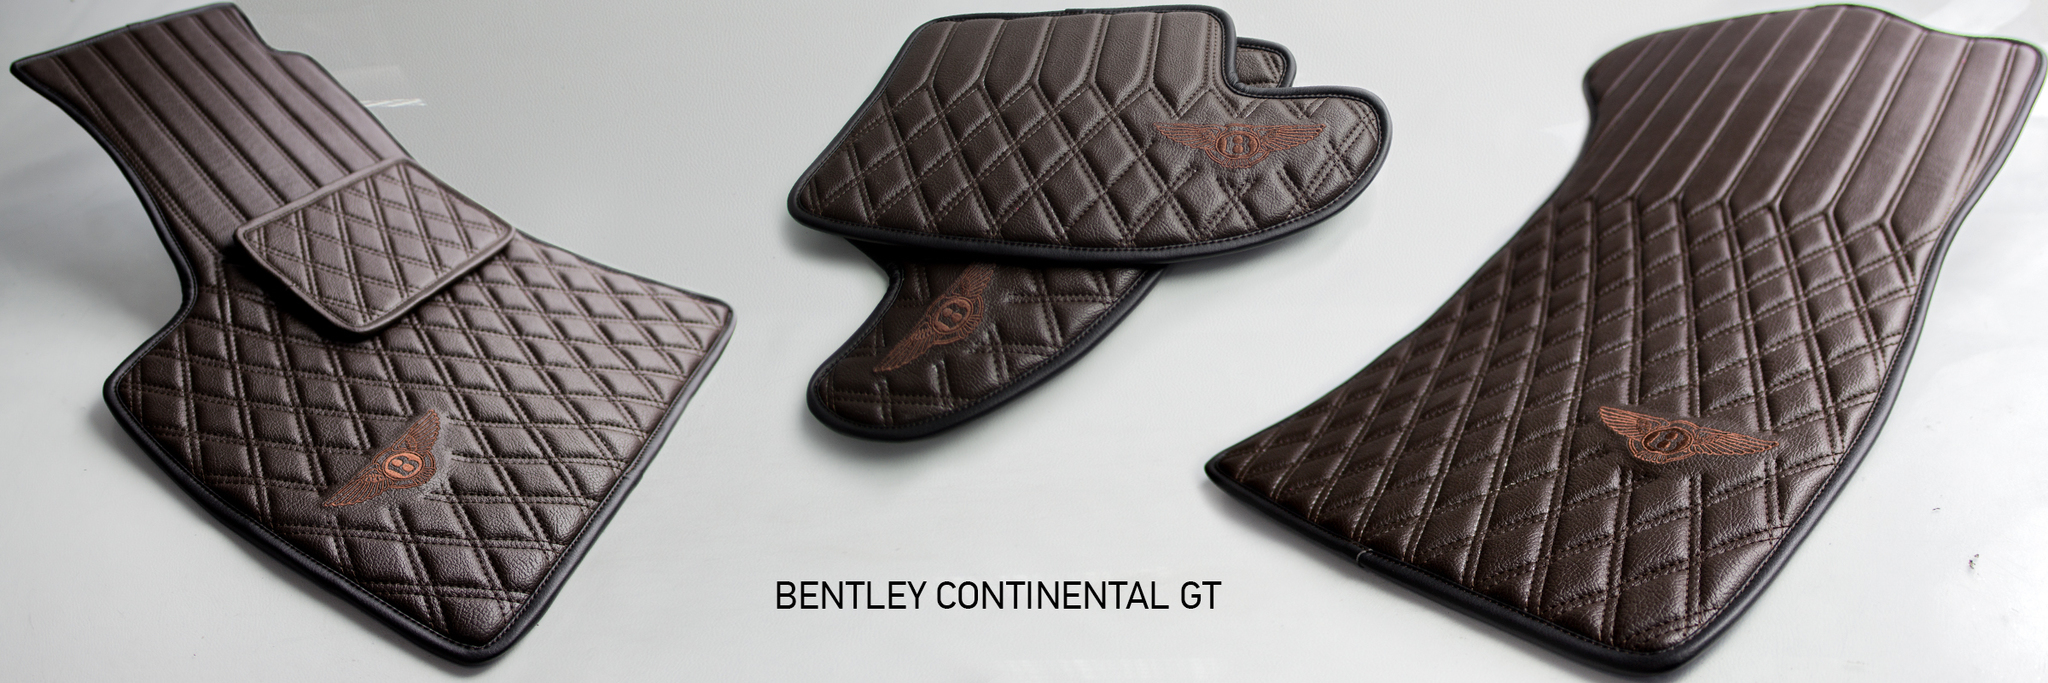 images-products-1-89-232988761-BENTLEY_CONTINENTAL_GT_X.jpg